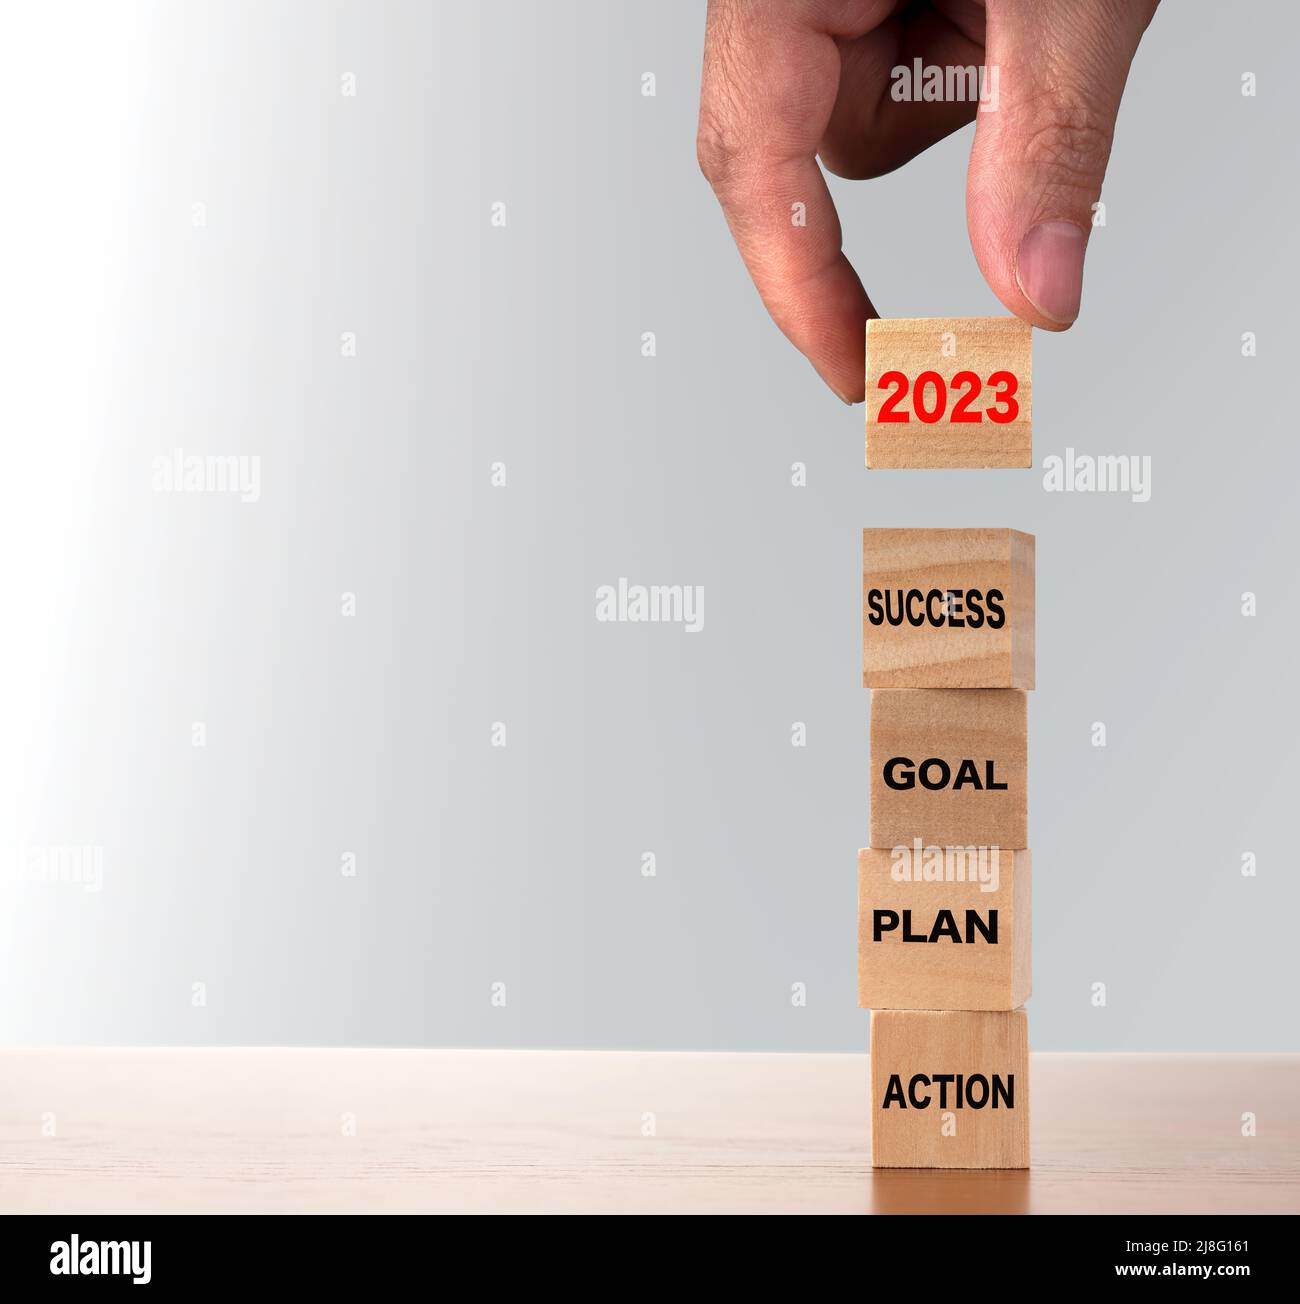 2023 new year strategy business growth concept. 2023 new year growth concept with action, goal, plan and success. Stock Photo